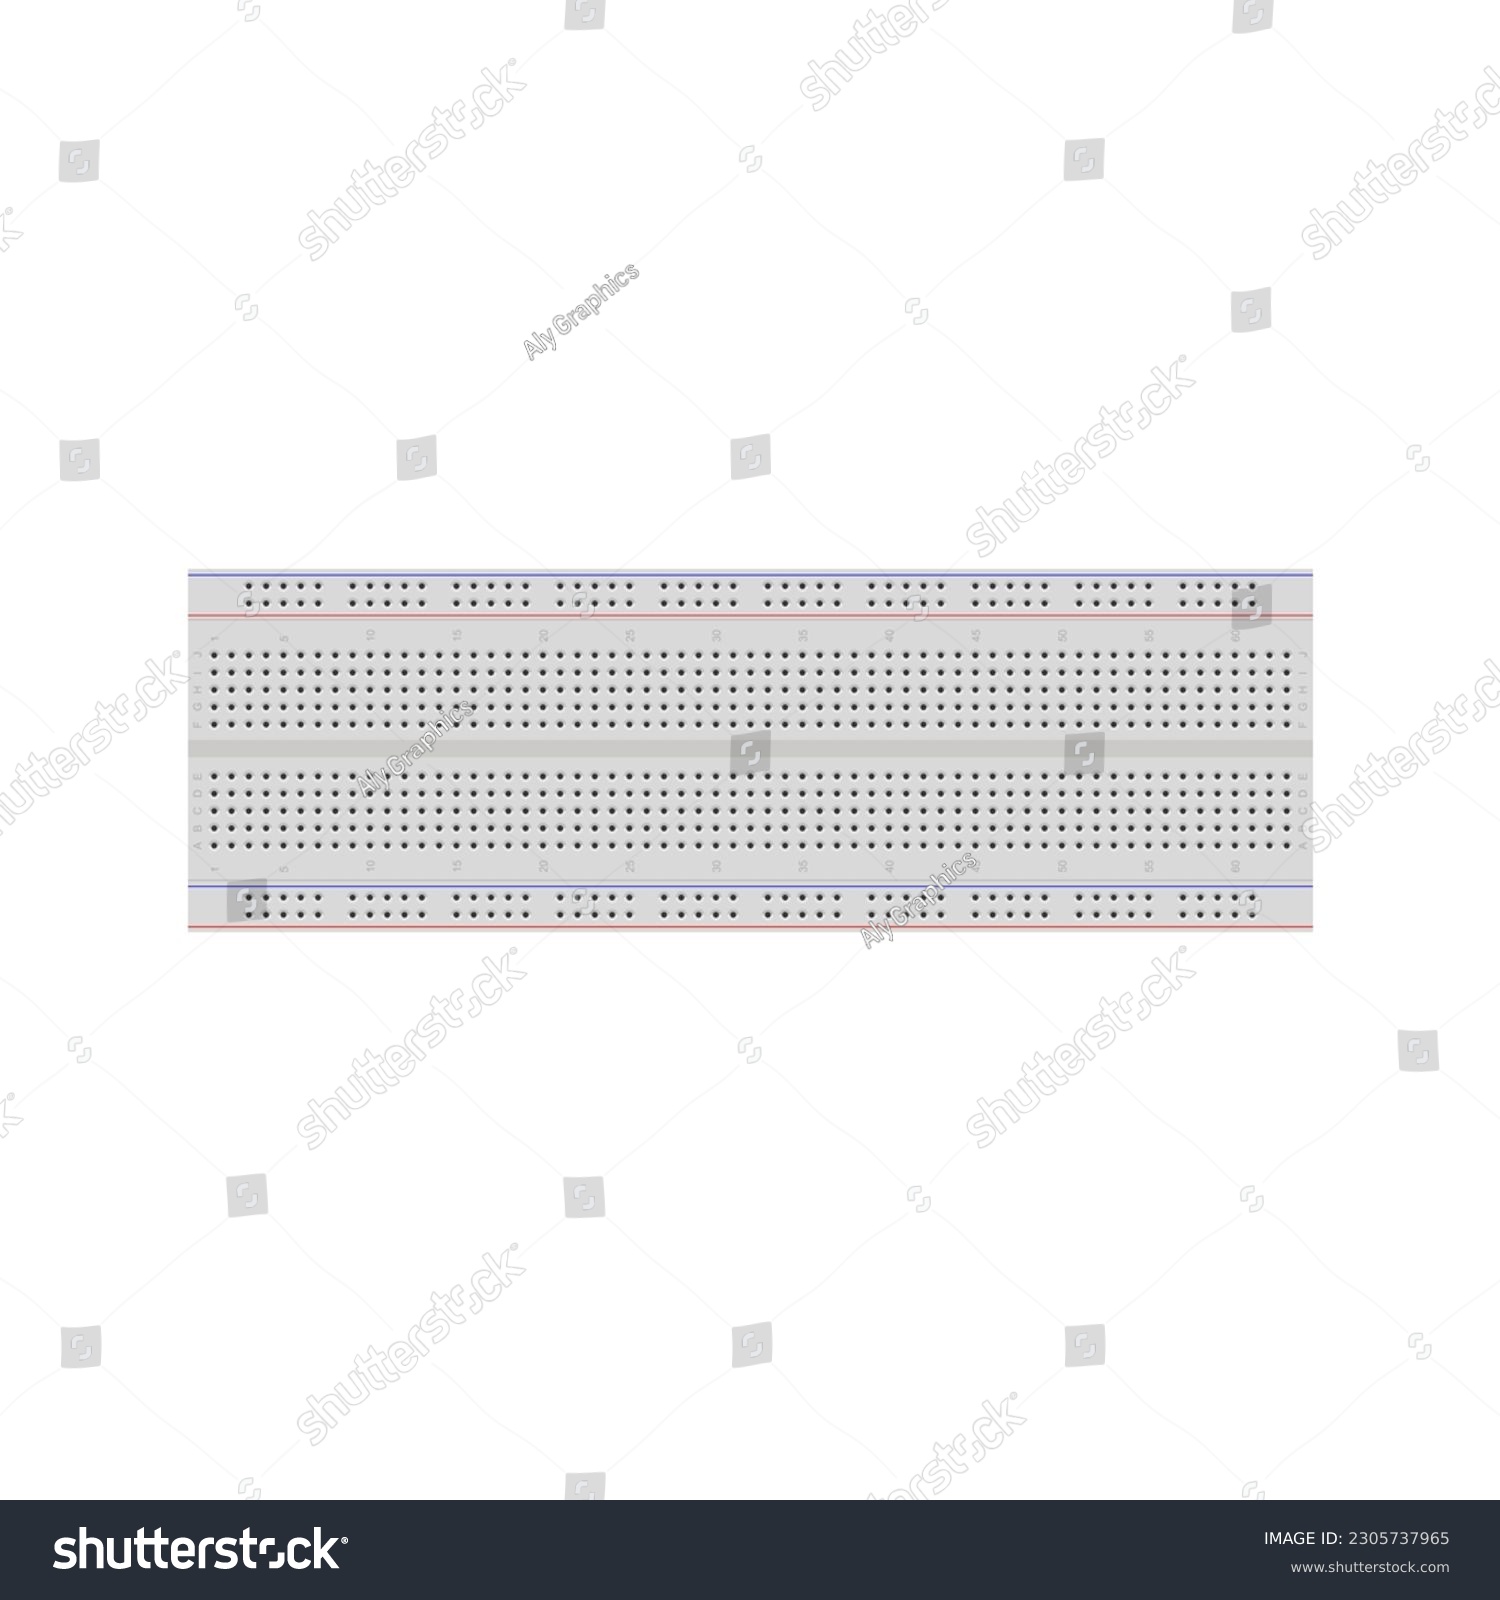 SVG of Explore and download a high-quality vector illustration of a breadboard, the essential tool for prototyping and testing electronic circuits, with seamless connectivity and reusable components svg